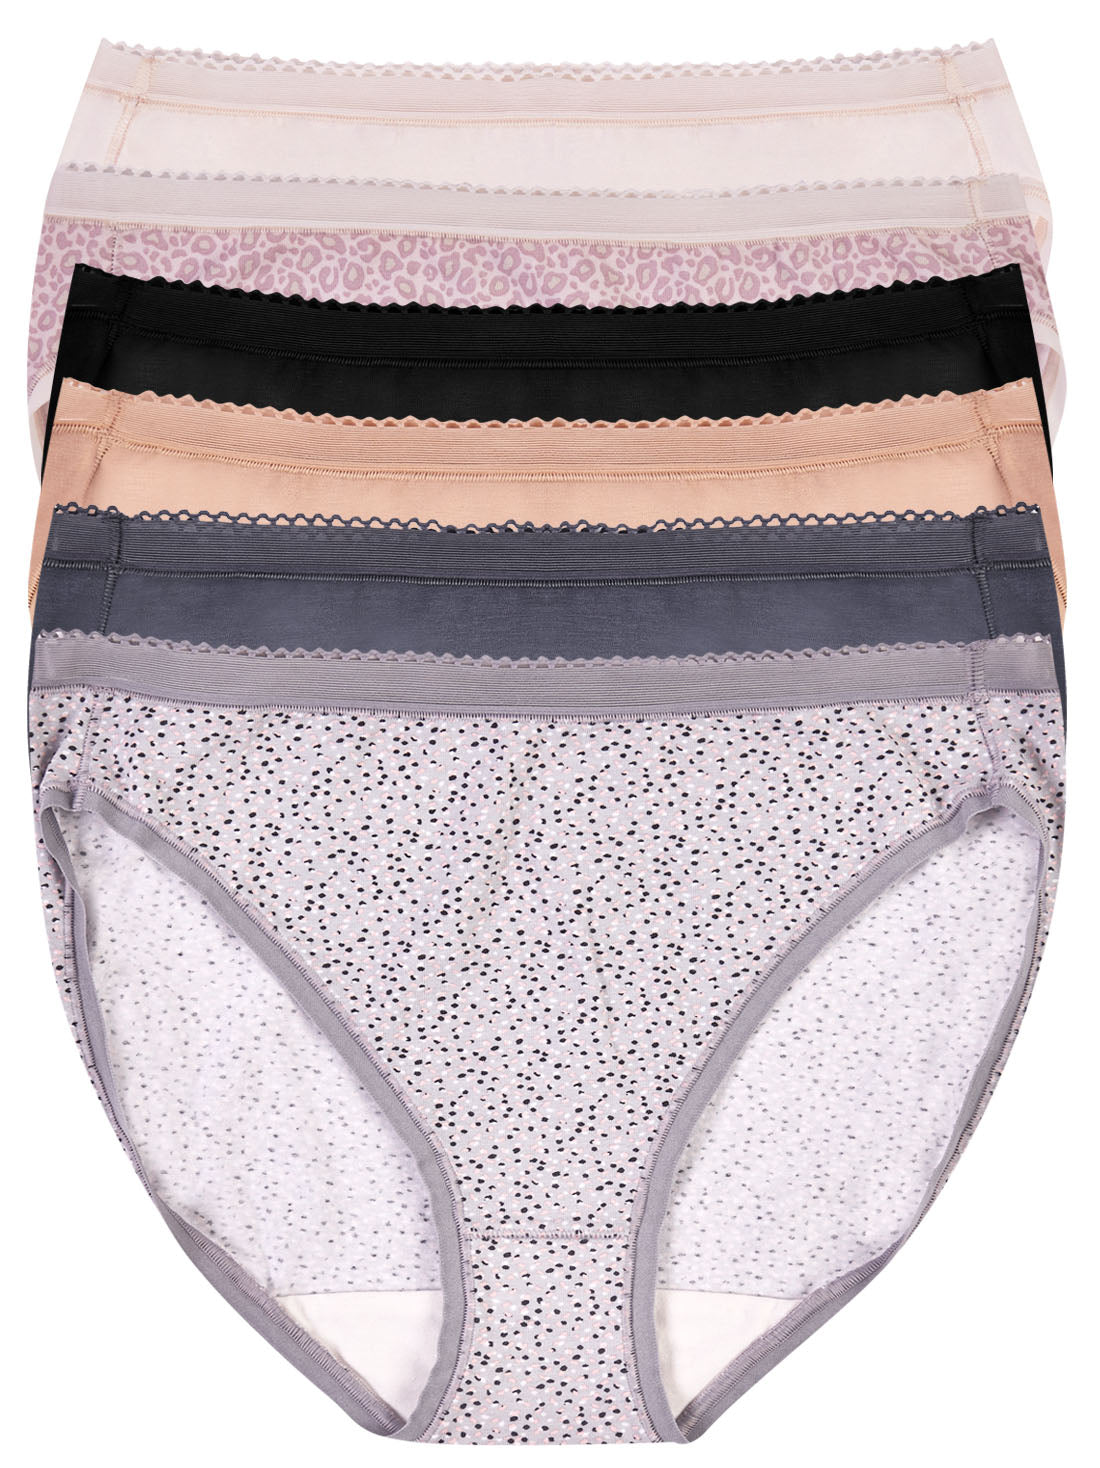 Light Gray Pack of 6 French Cut Panties 79001